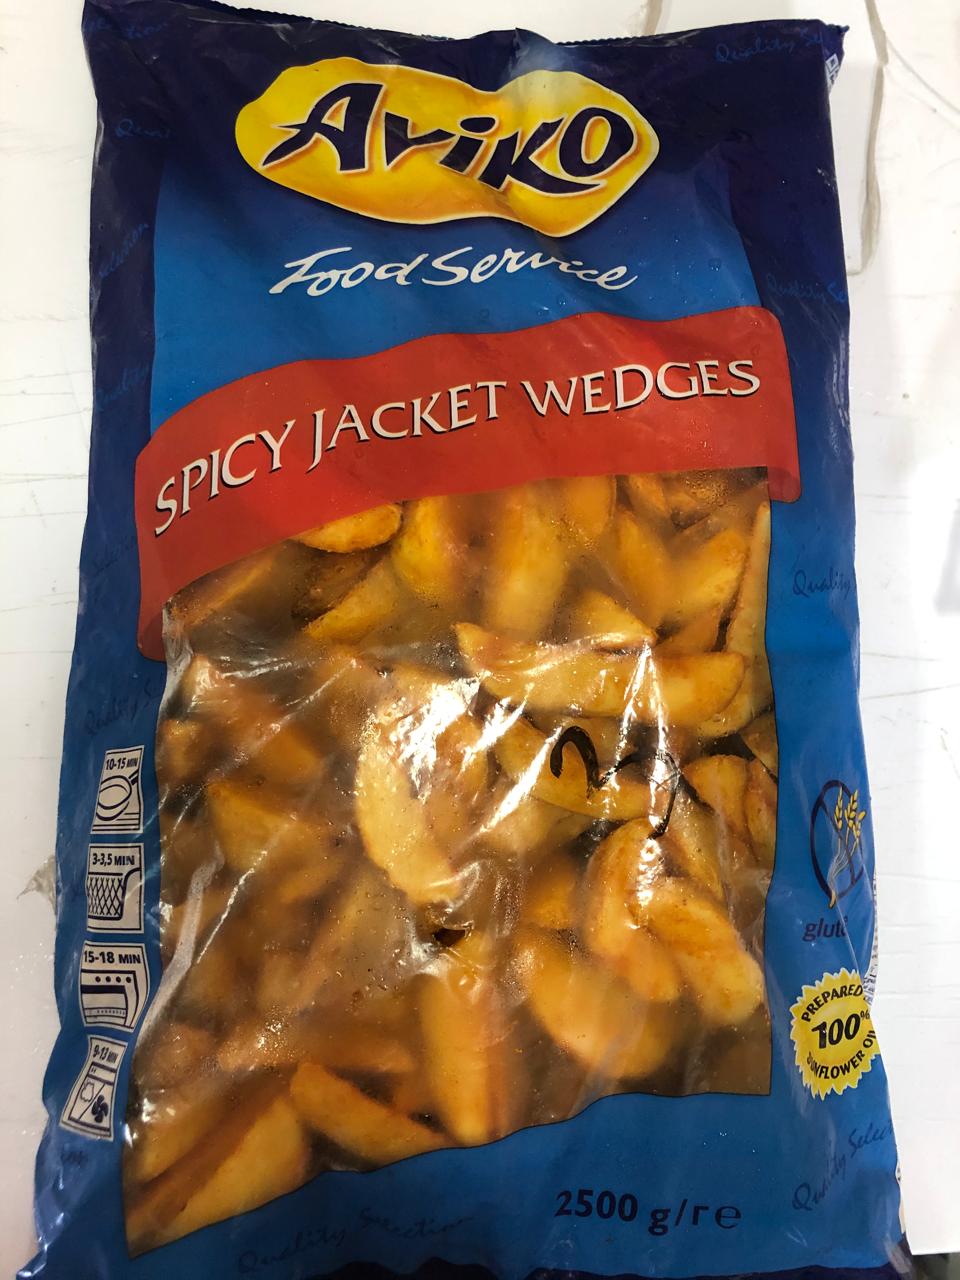 FF - Aviko Spicy Jacket Wedges 2500g 1s packet